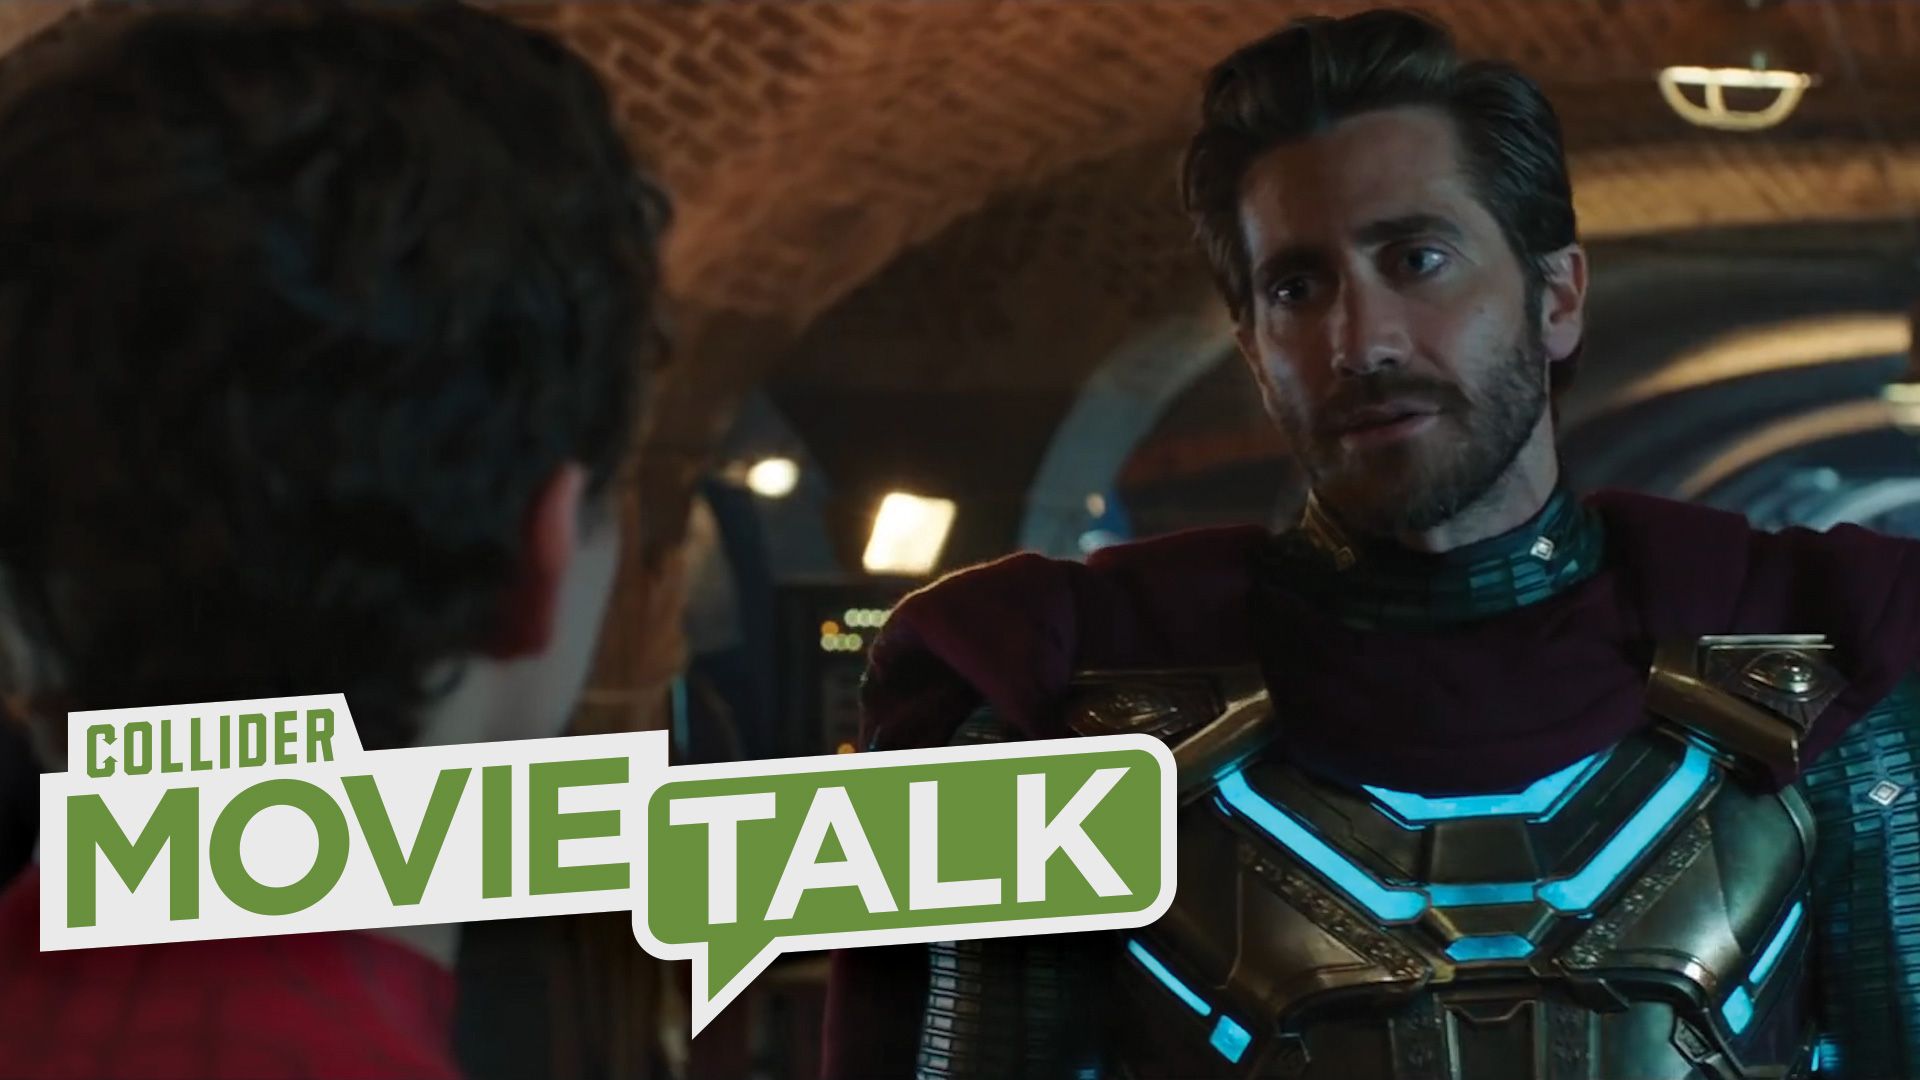 Spider-Man: Far From Home: Is Mysterio Lying about the MCU Multiverse? | Collider